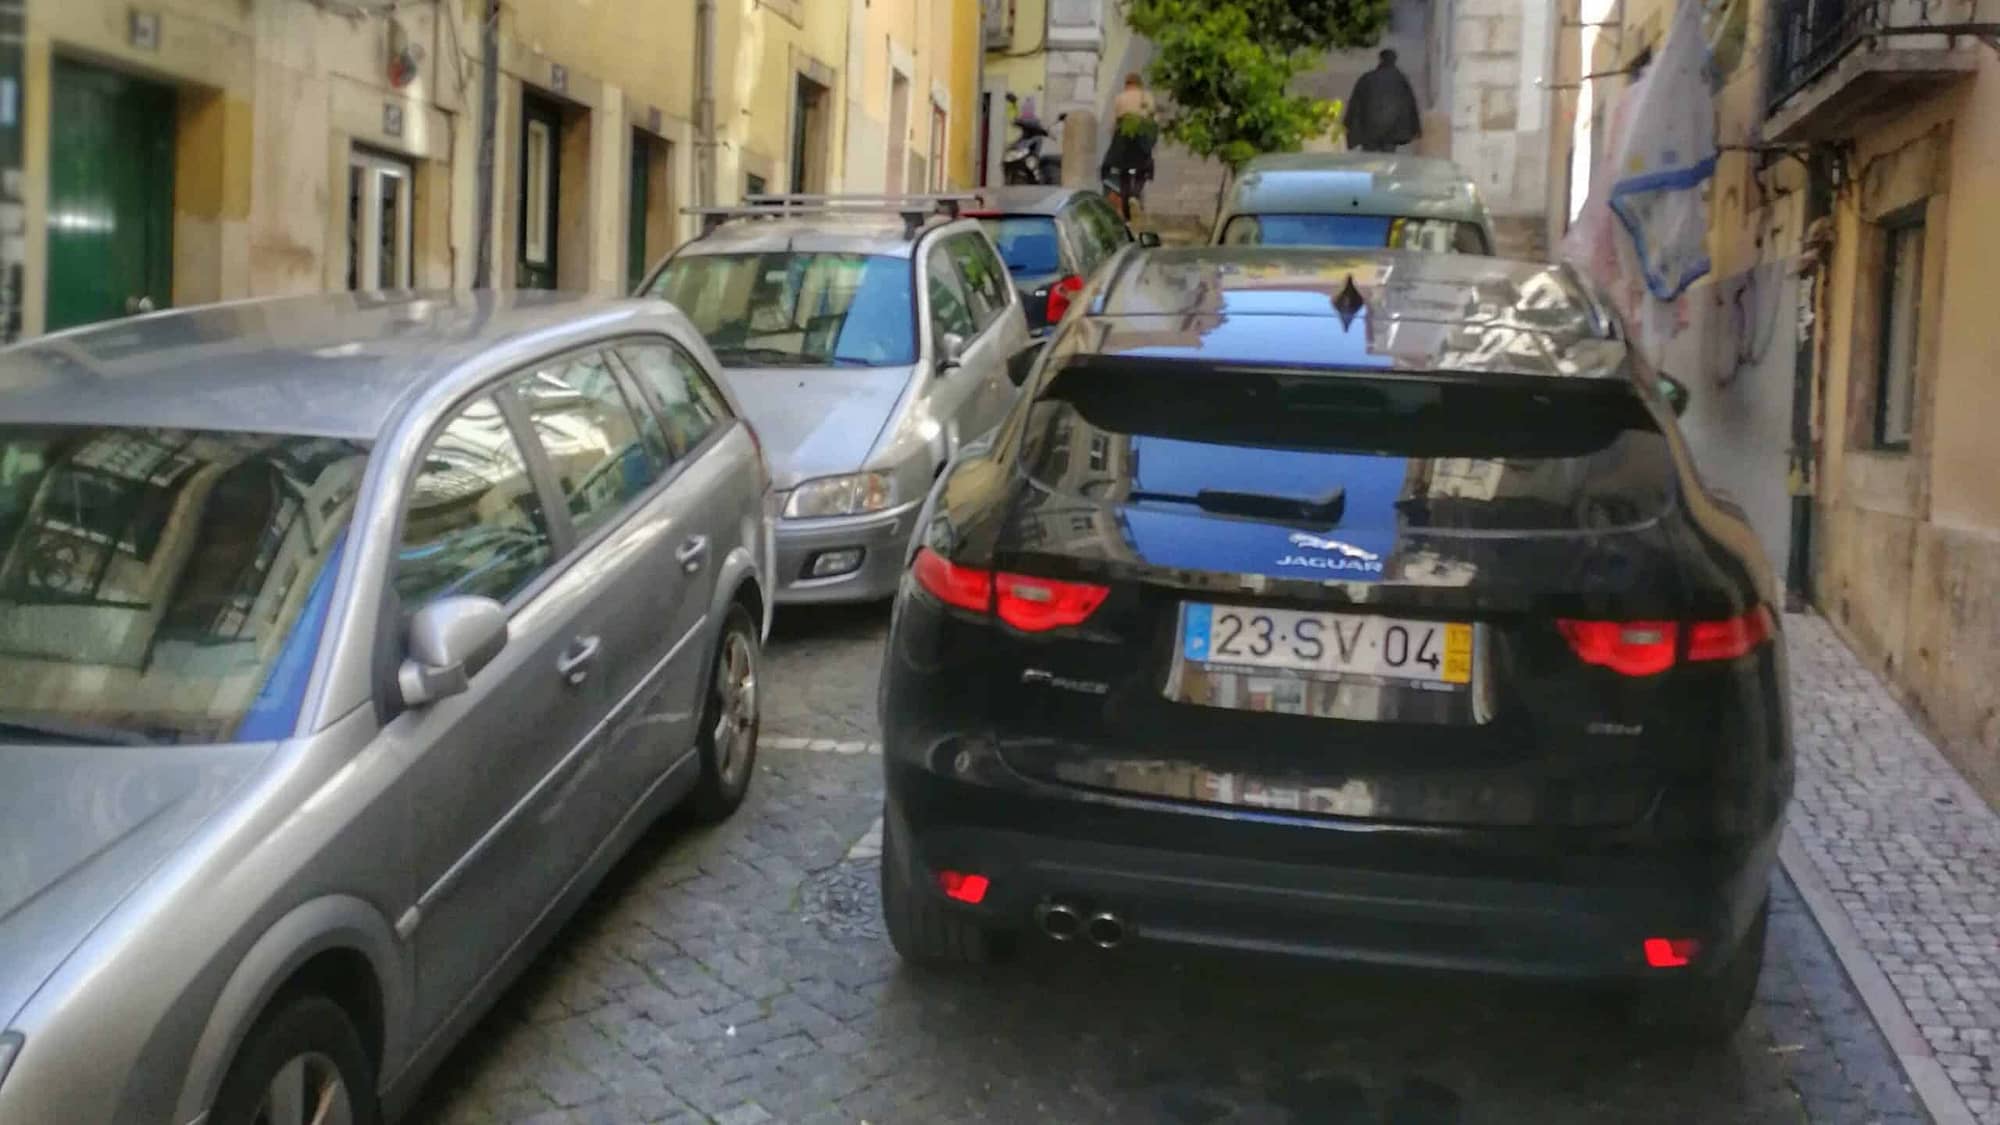 Parking is complicated in Lisbon, especially in the city centre, you have to find cheap or free solutions